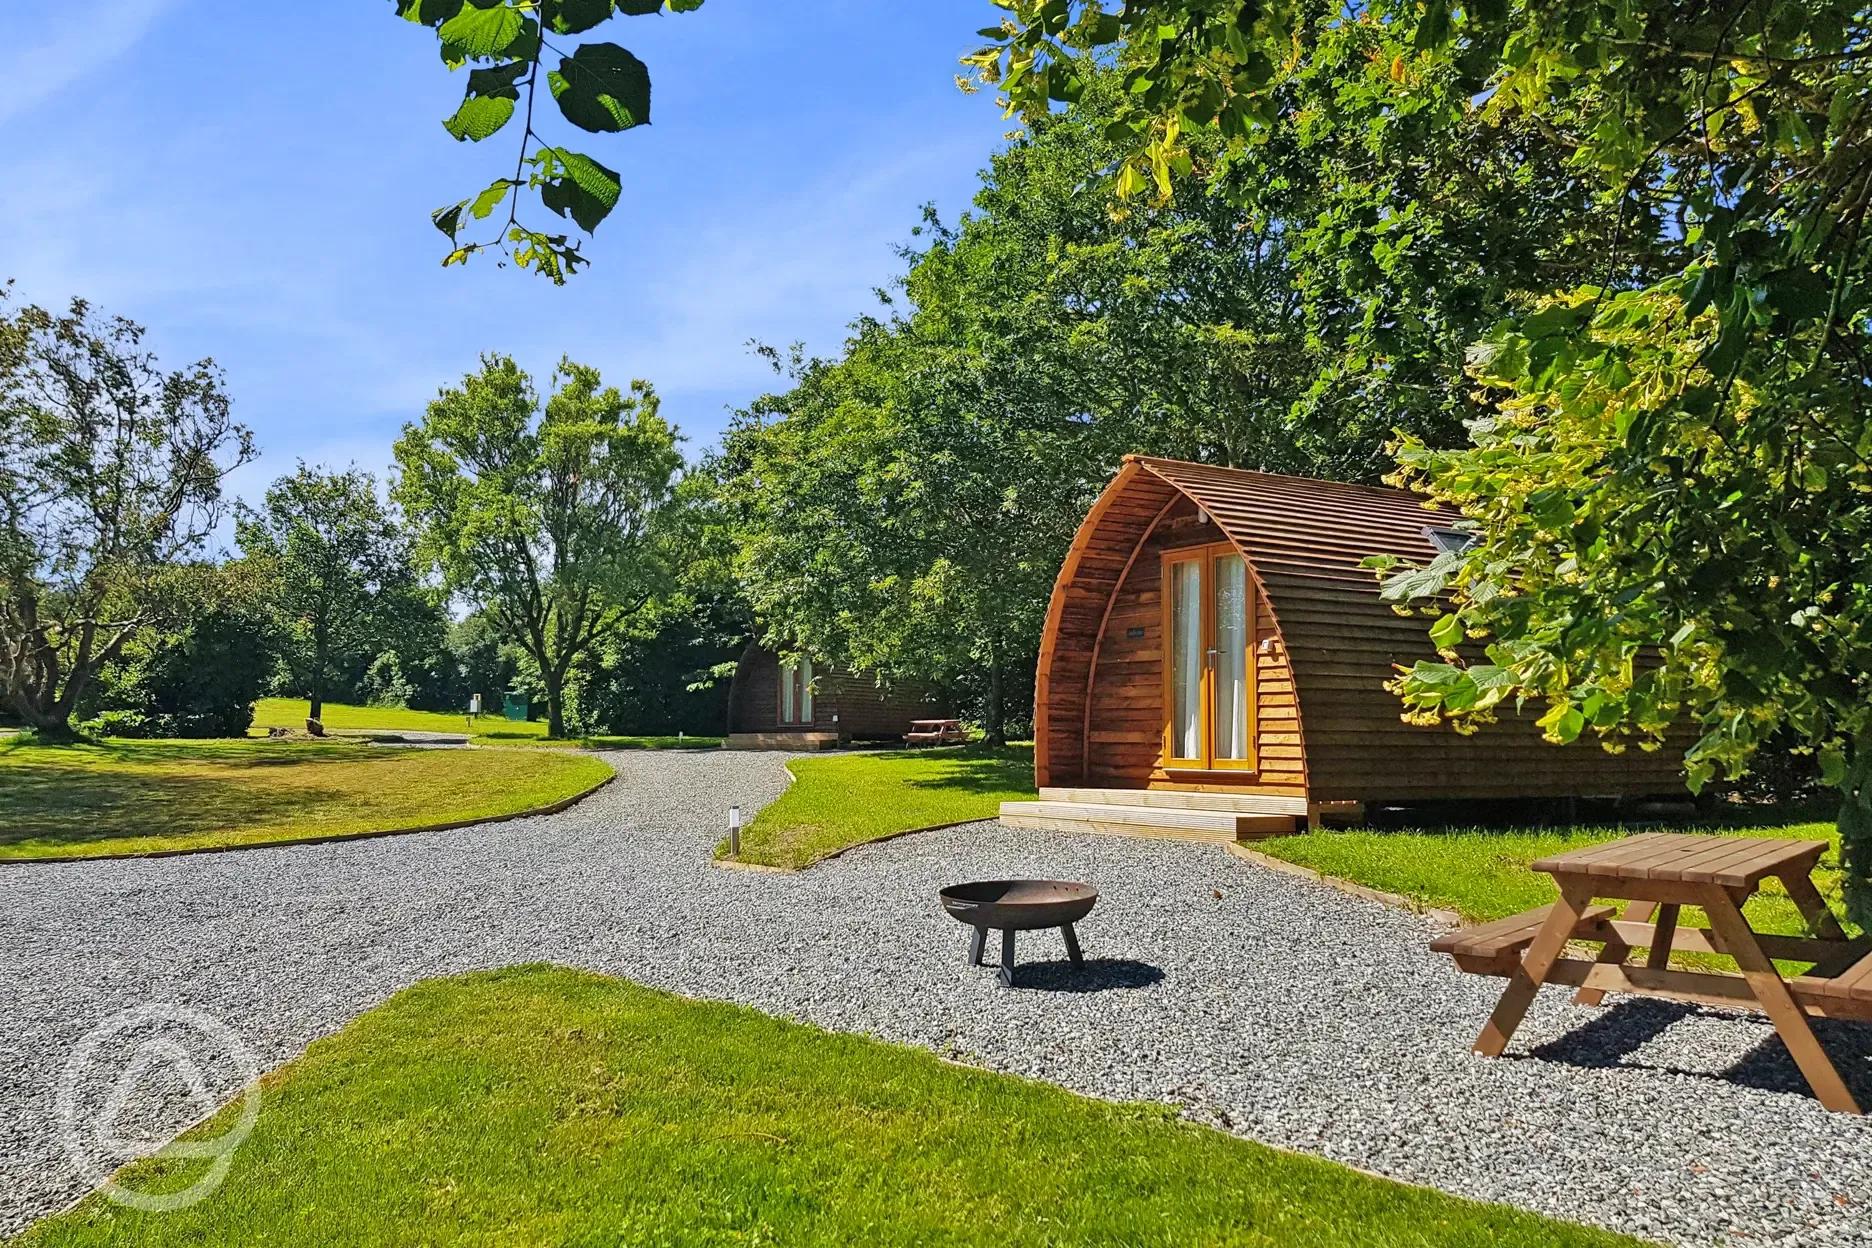 Ensuite Deluxe Wigwam Pods with private fire pits